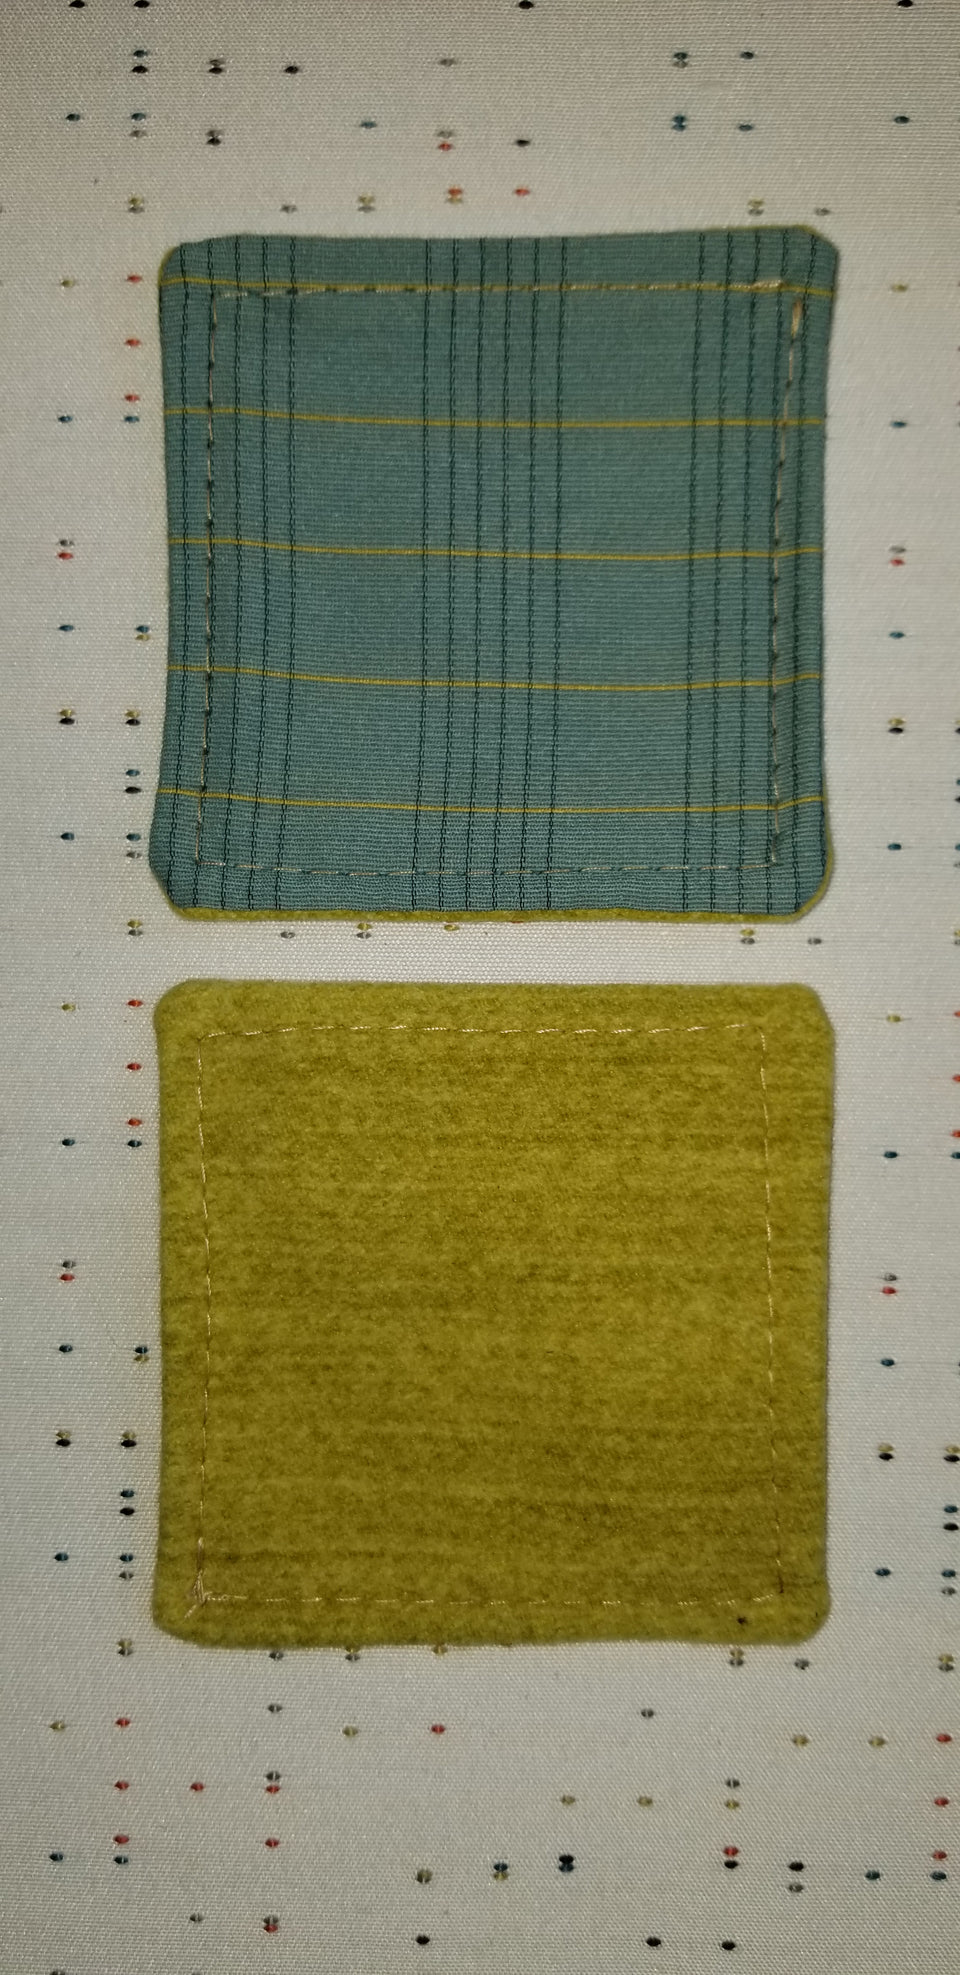 Charlie turquoise and lime green plaid coasters front and back detail.